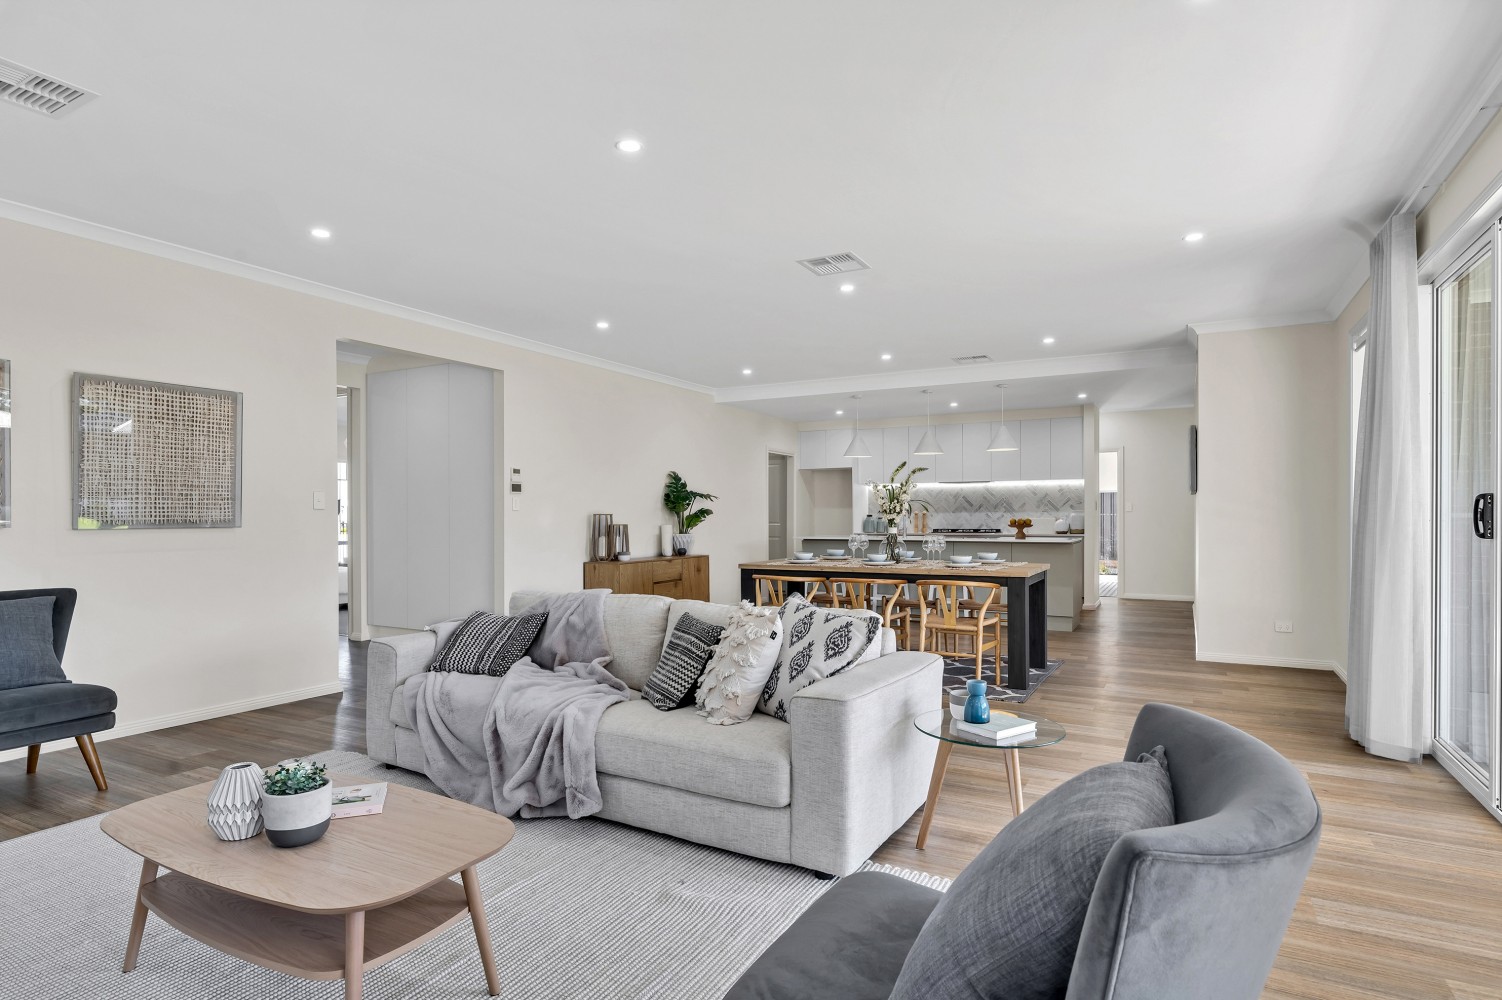 Traditional | Rossdale Homes | Rossdale Homes - Adelaide, South ...